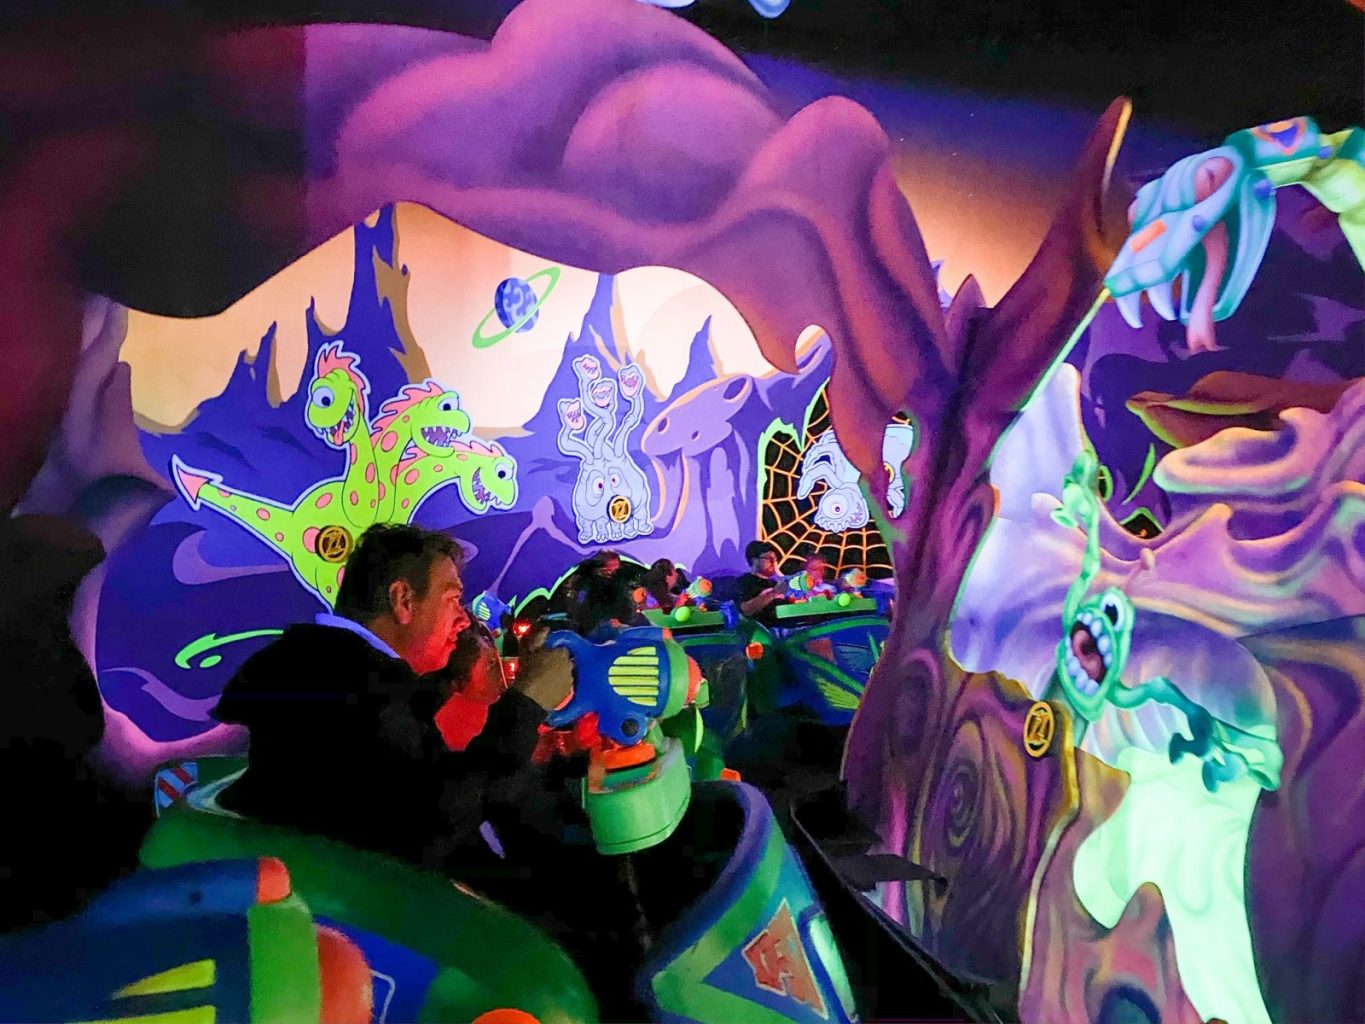 people riding the Buzz Lightyear ride